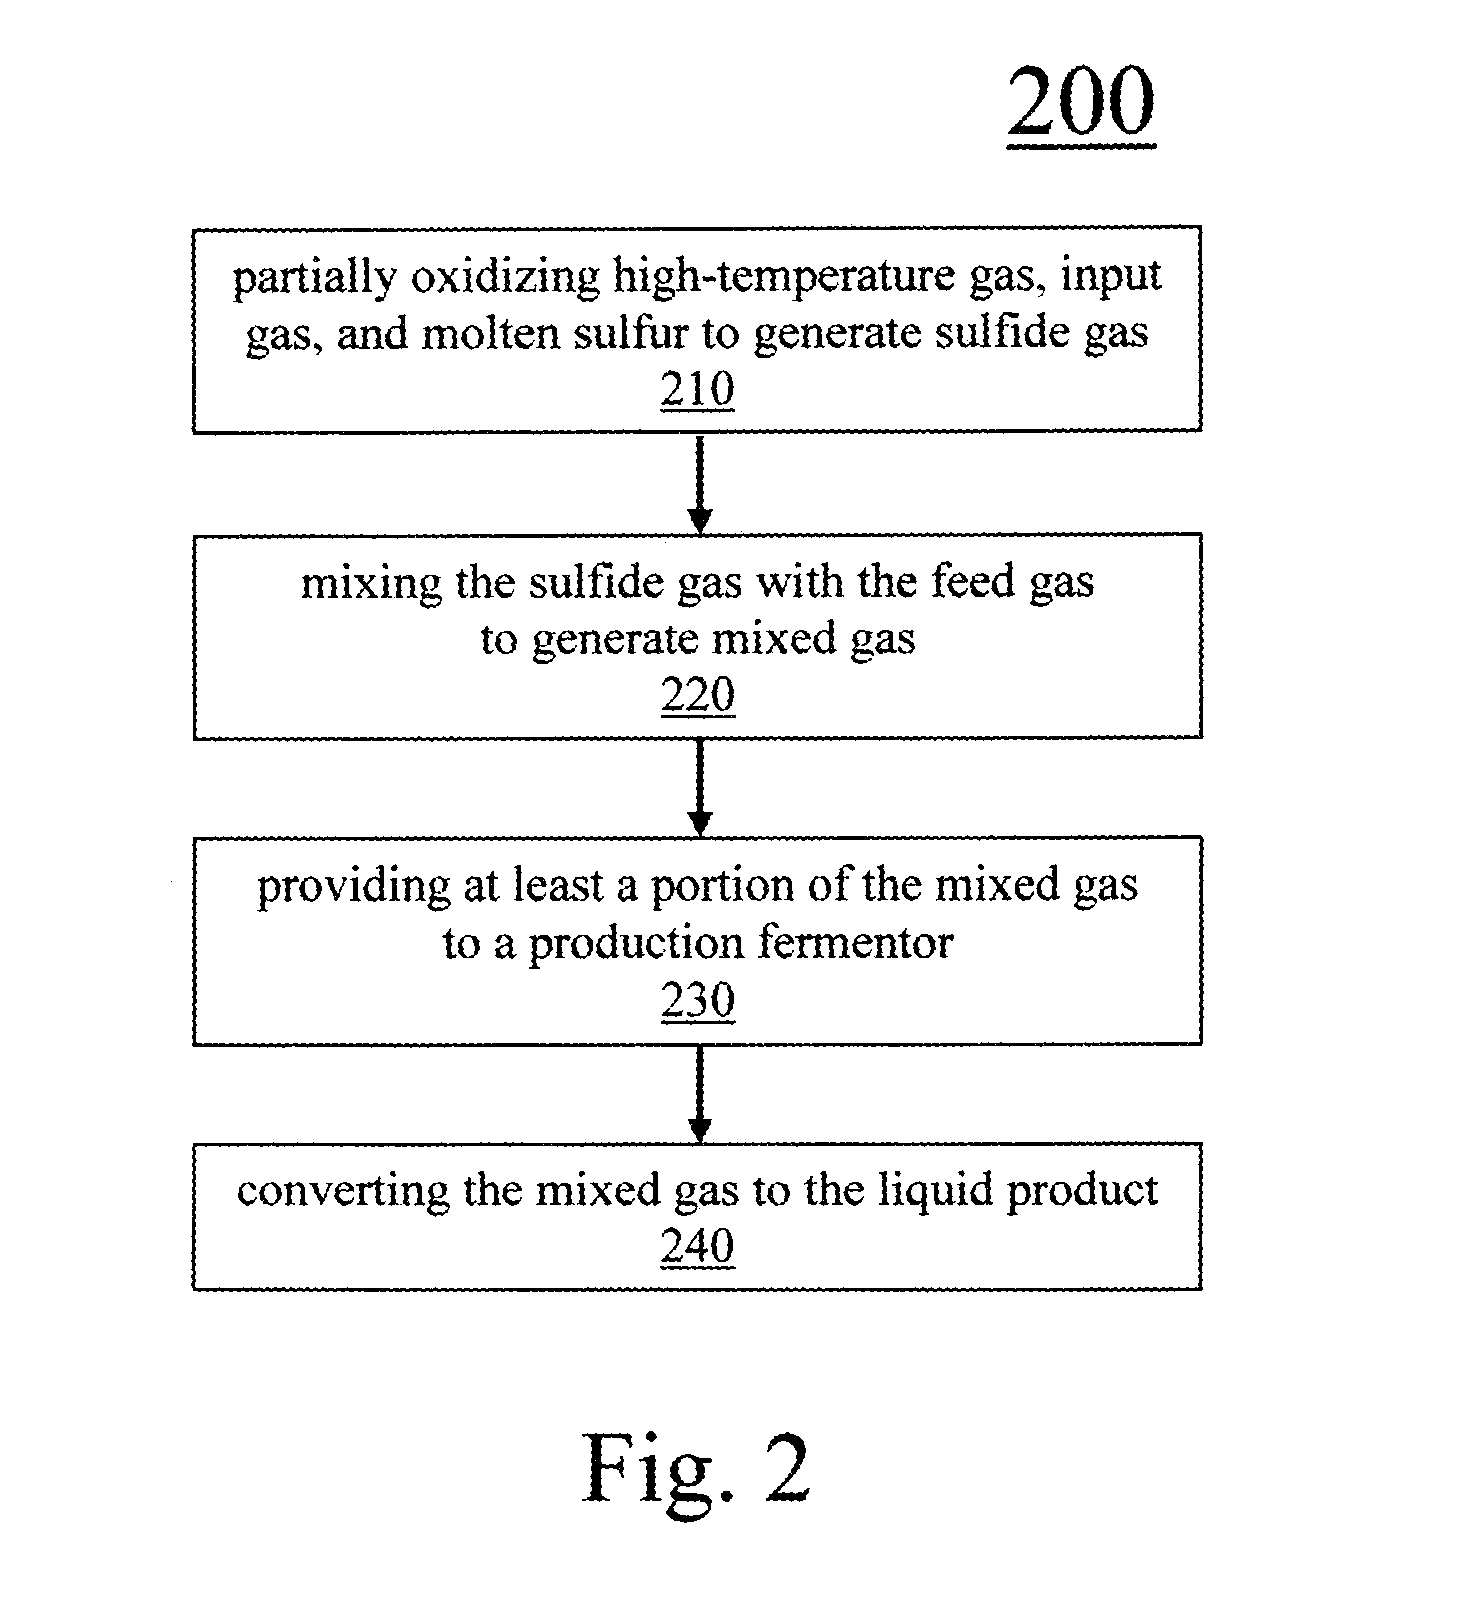 Sulfide generation process and system for syngas fermentation